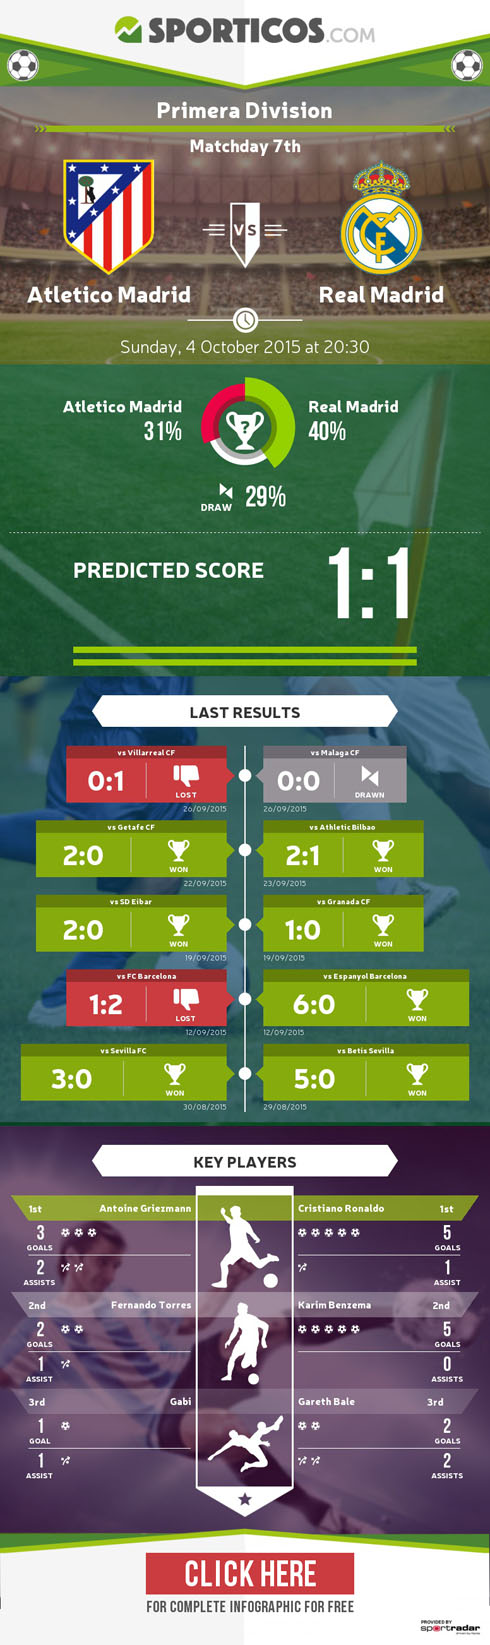 Sporticos Atletico Madrid vs Real Madrid infographic, in October of 2015